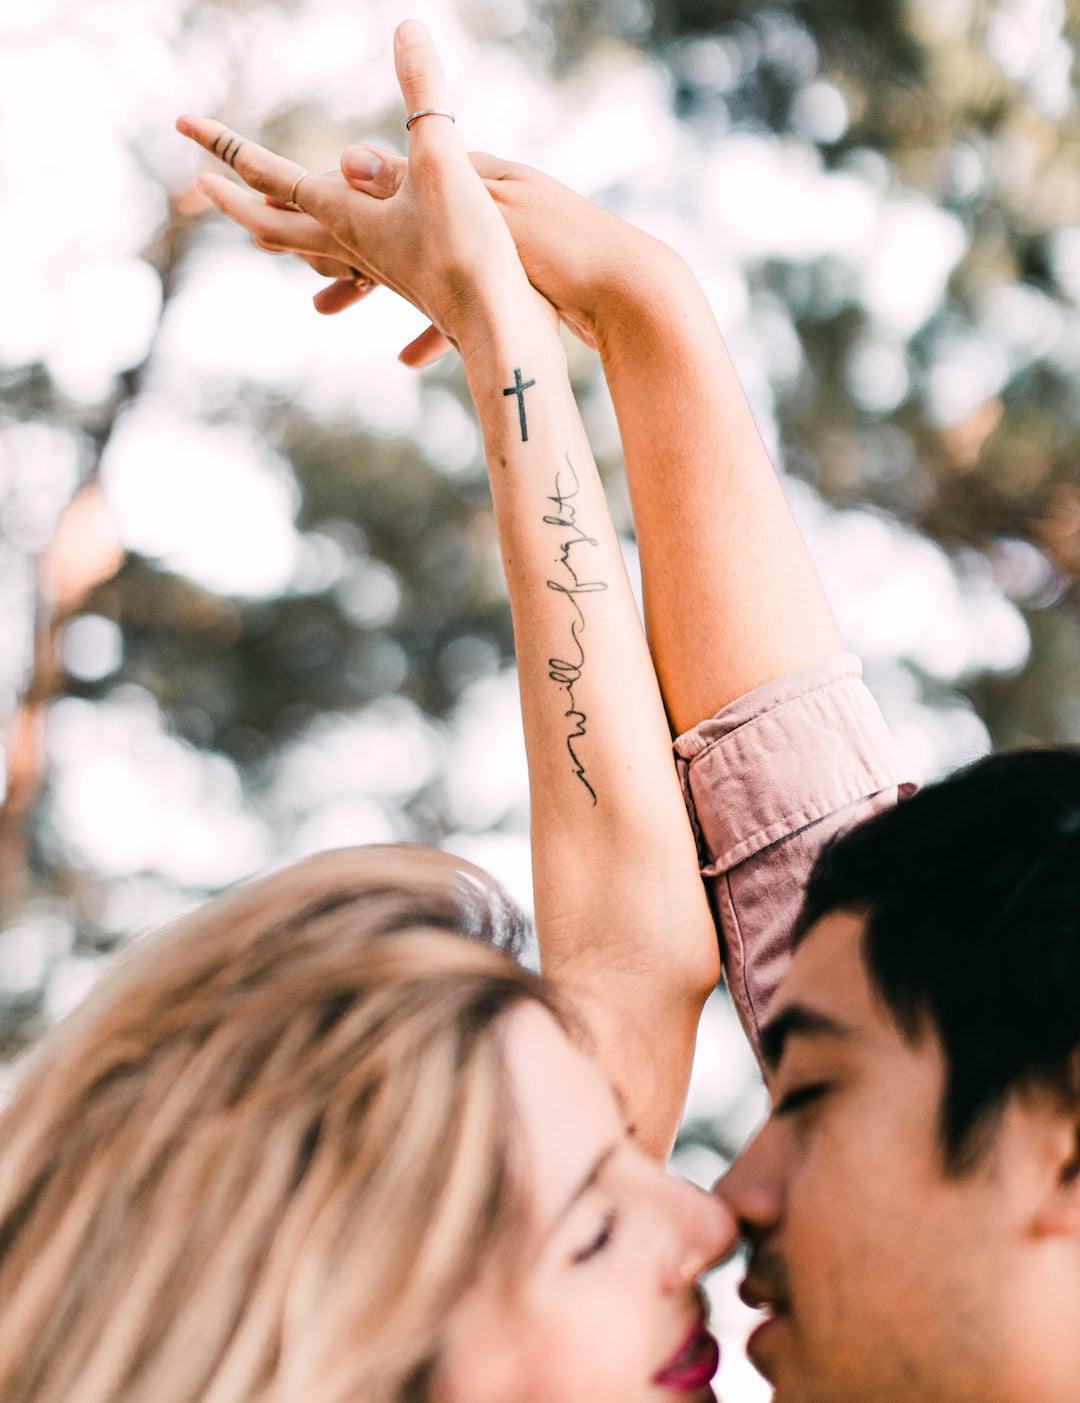 Common Tattoo Aftercare Mistakes to Avoid for Beautiful and Lasting Ink